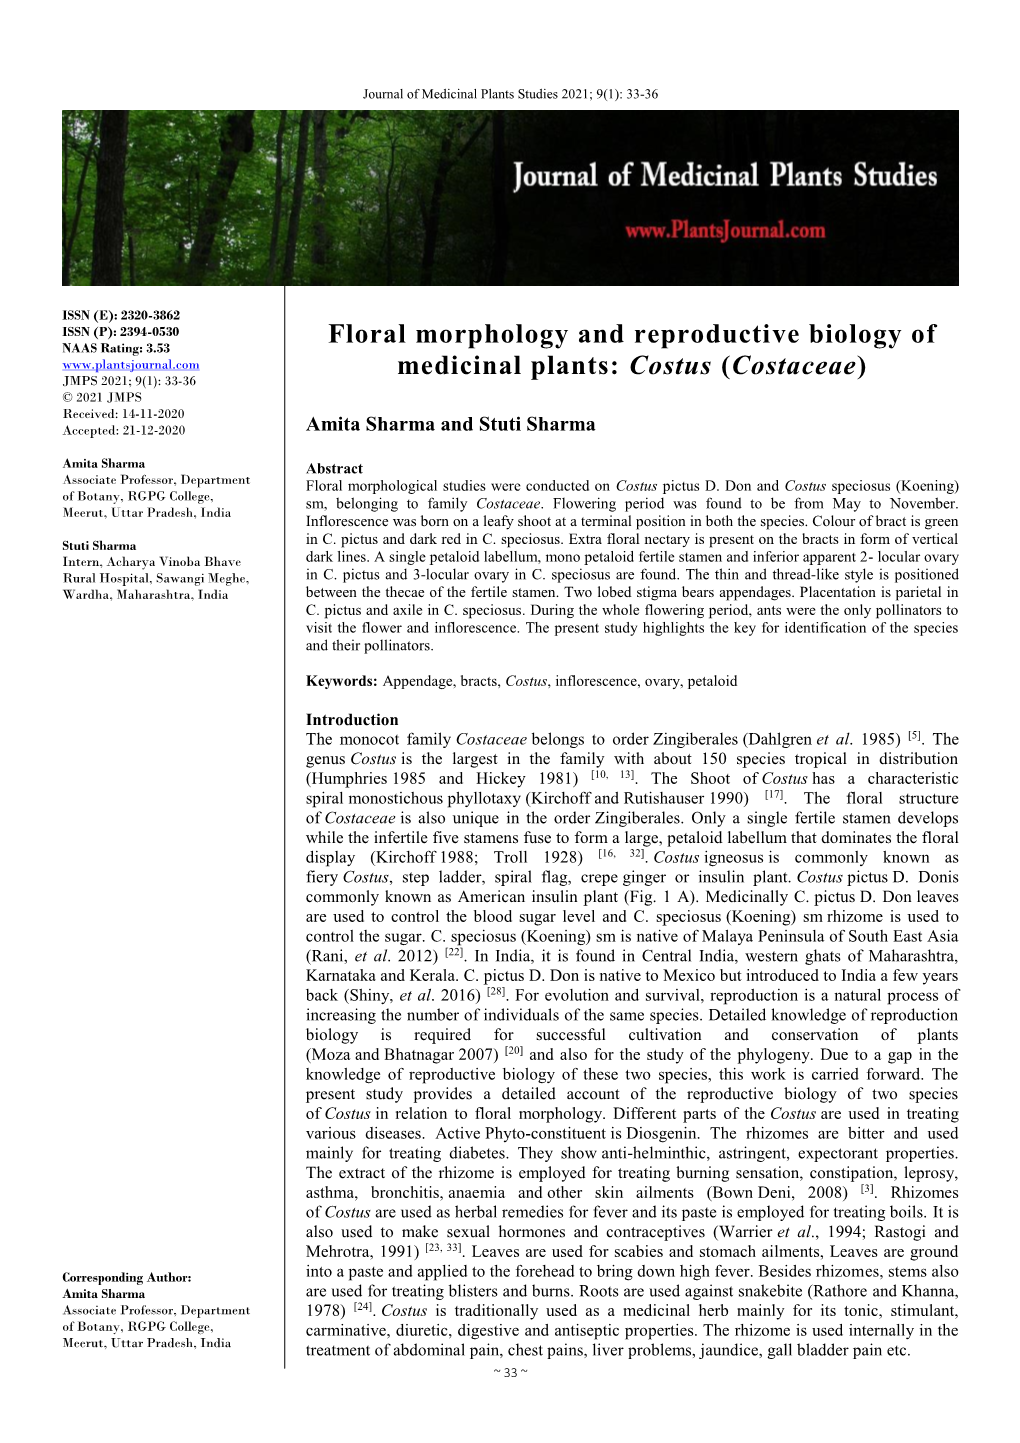 Floral Morphology and Reproductive Biology of Medicinal Plants: Costus